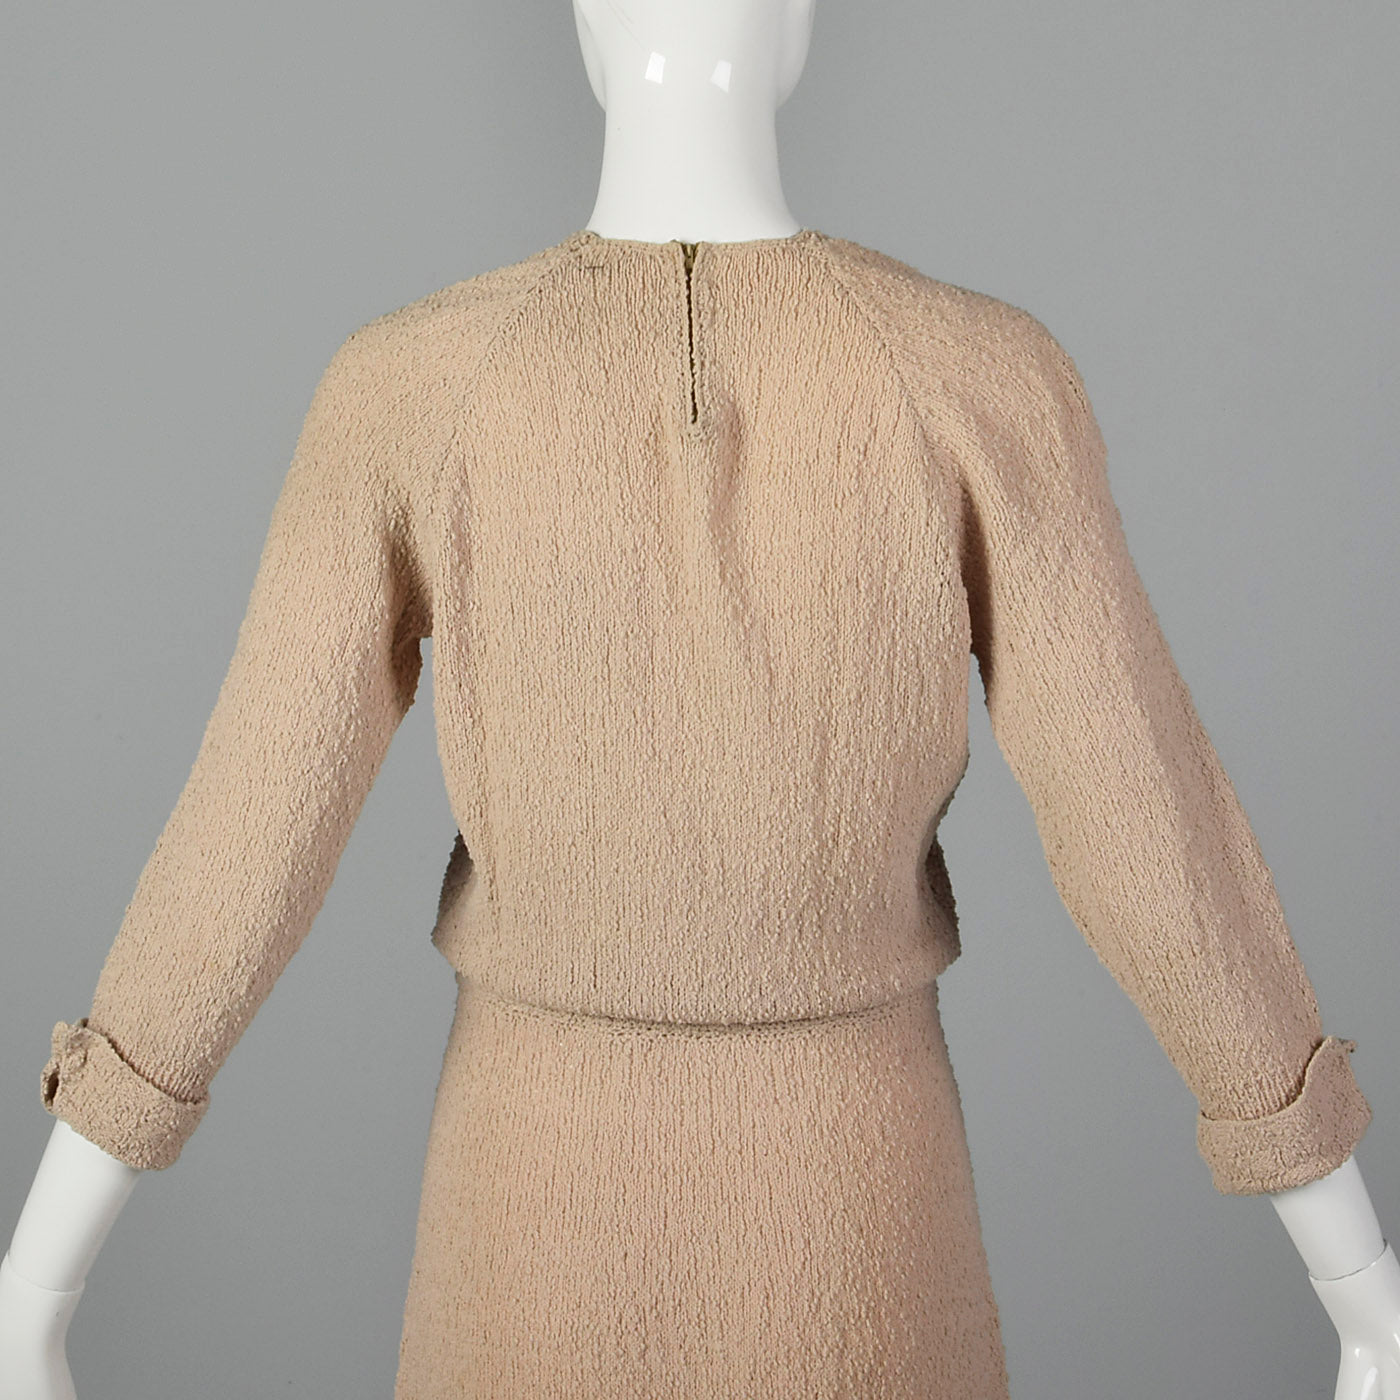 1940s Taupe Knit Dress with Beaded Bust